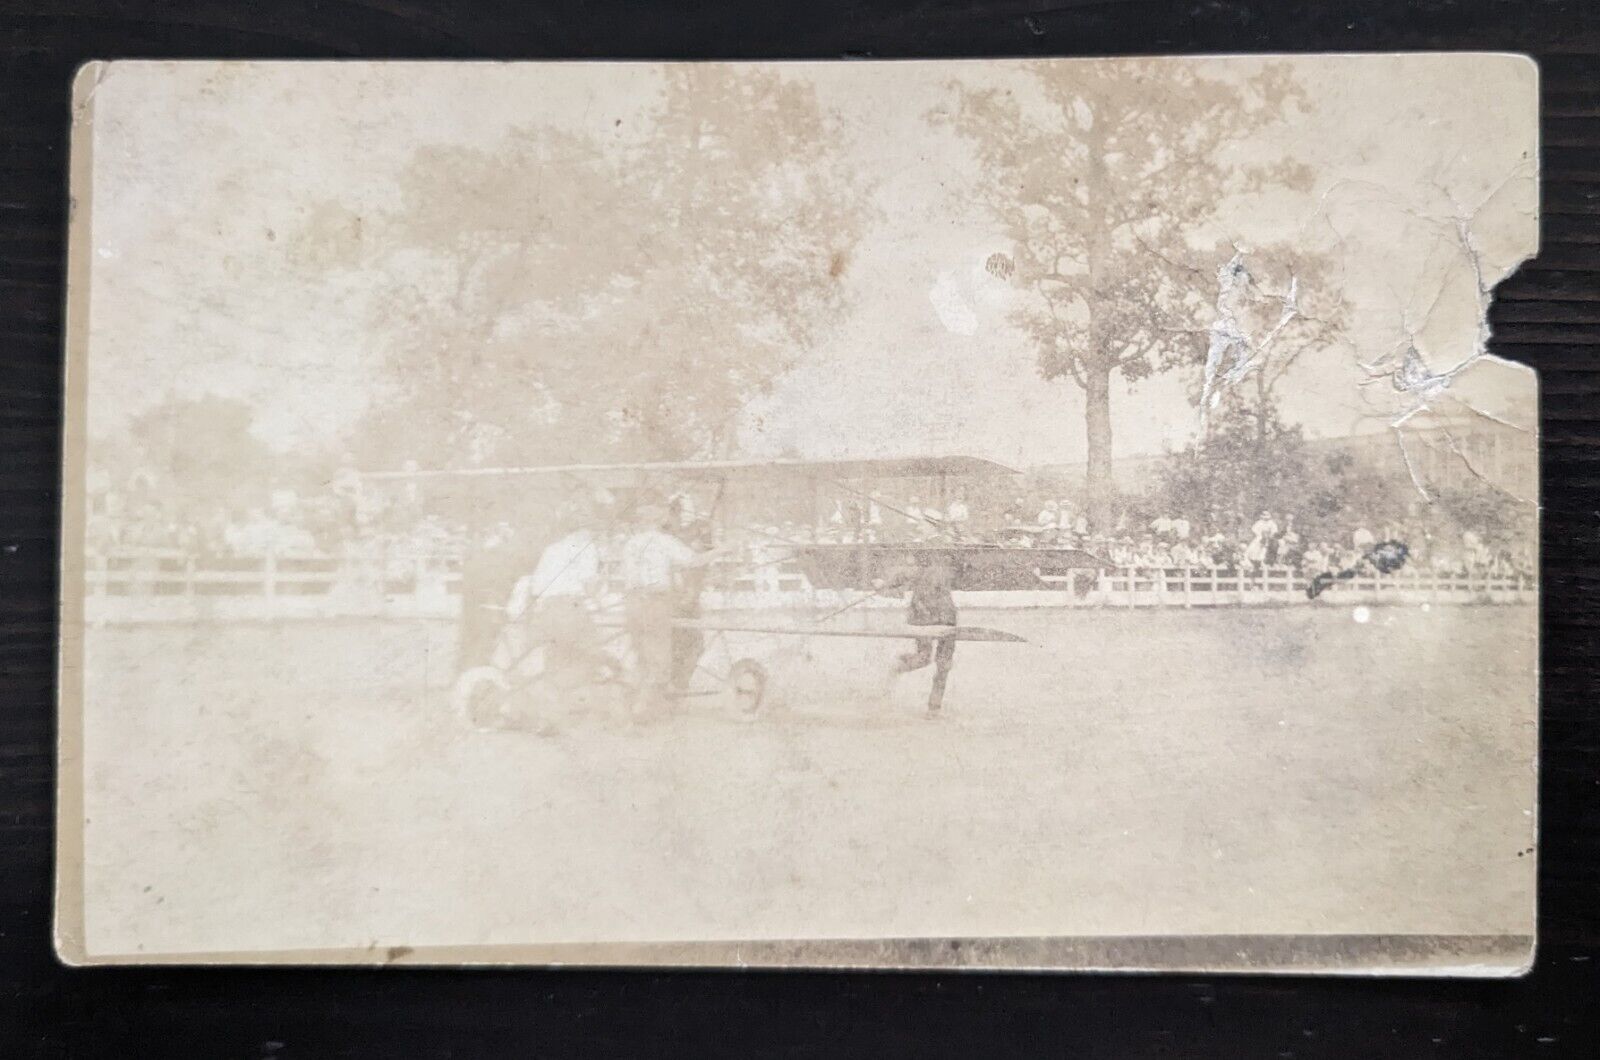 RPPC Early Aviation Men Push Airplane as Crowd Watches Possible Ohio Postcard